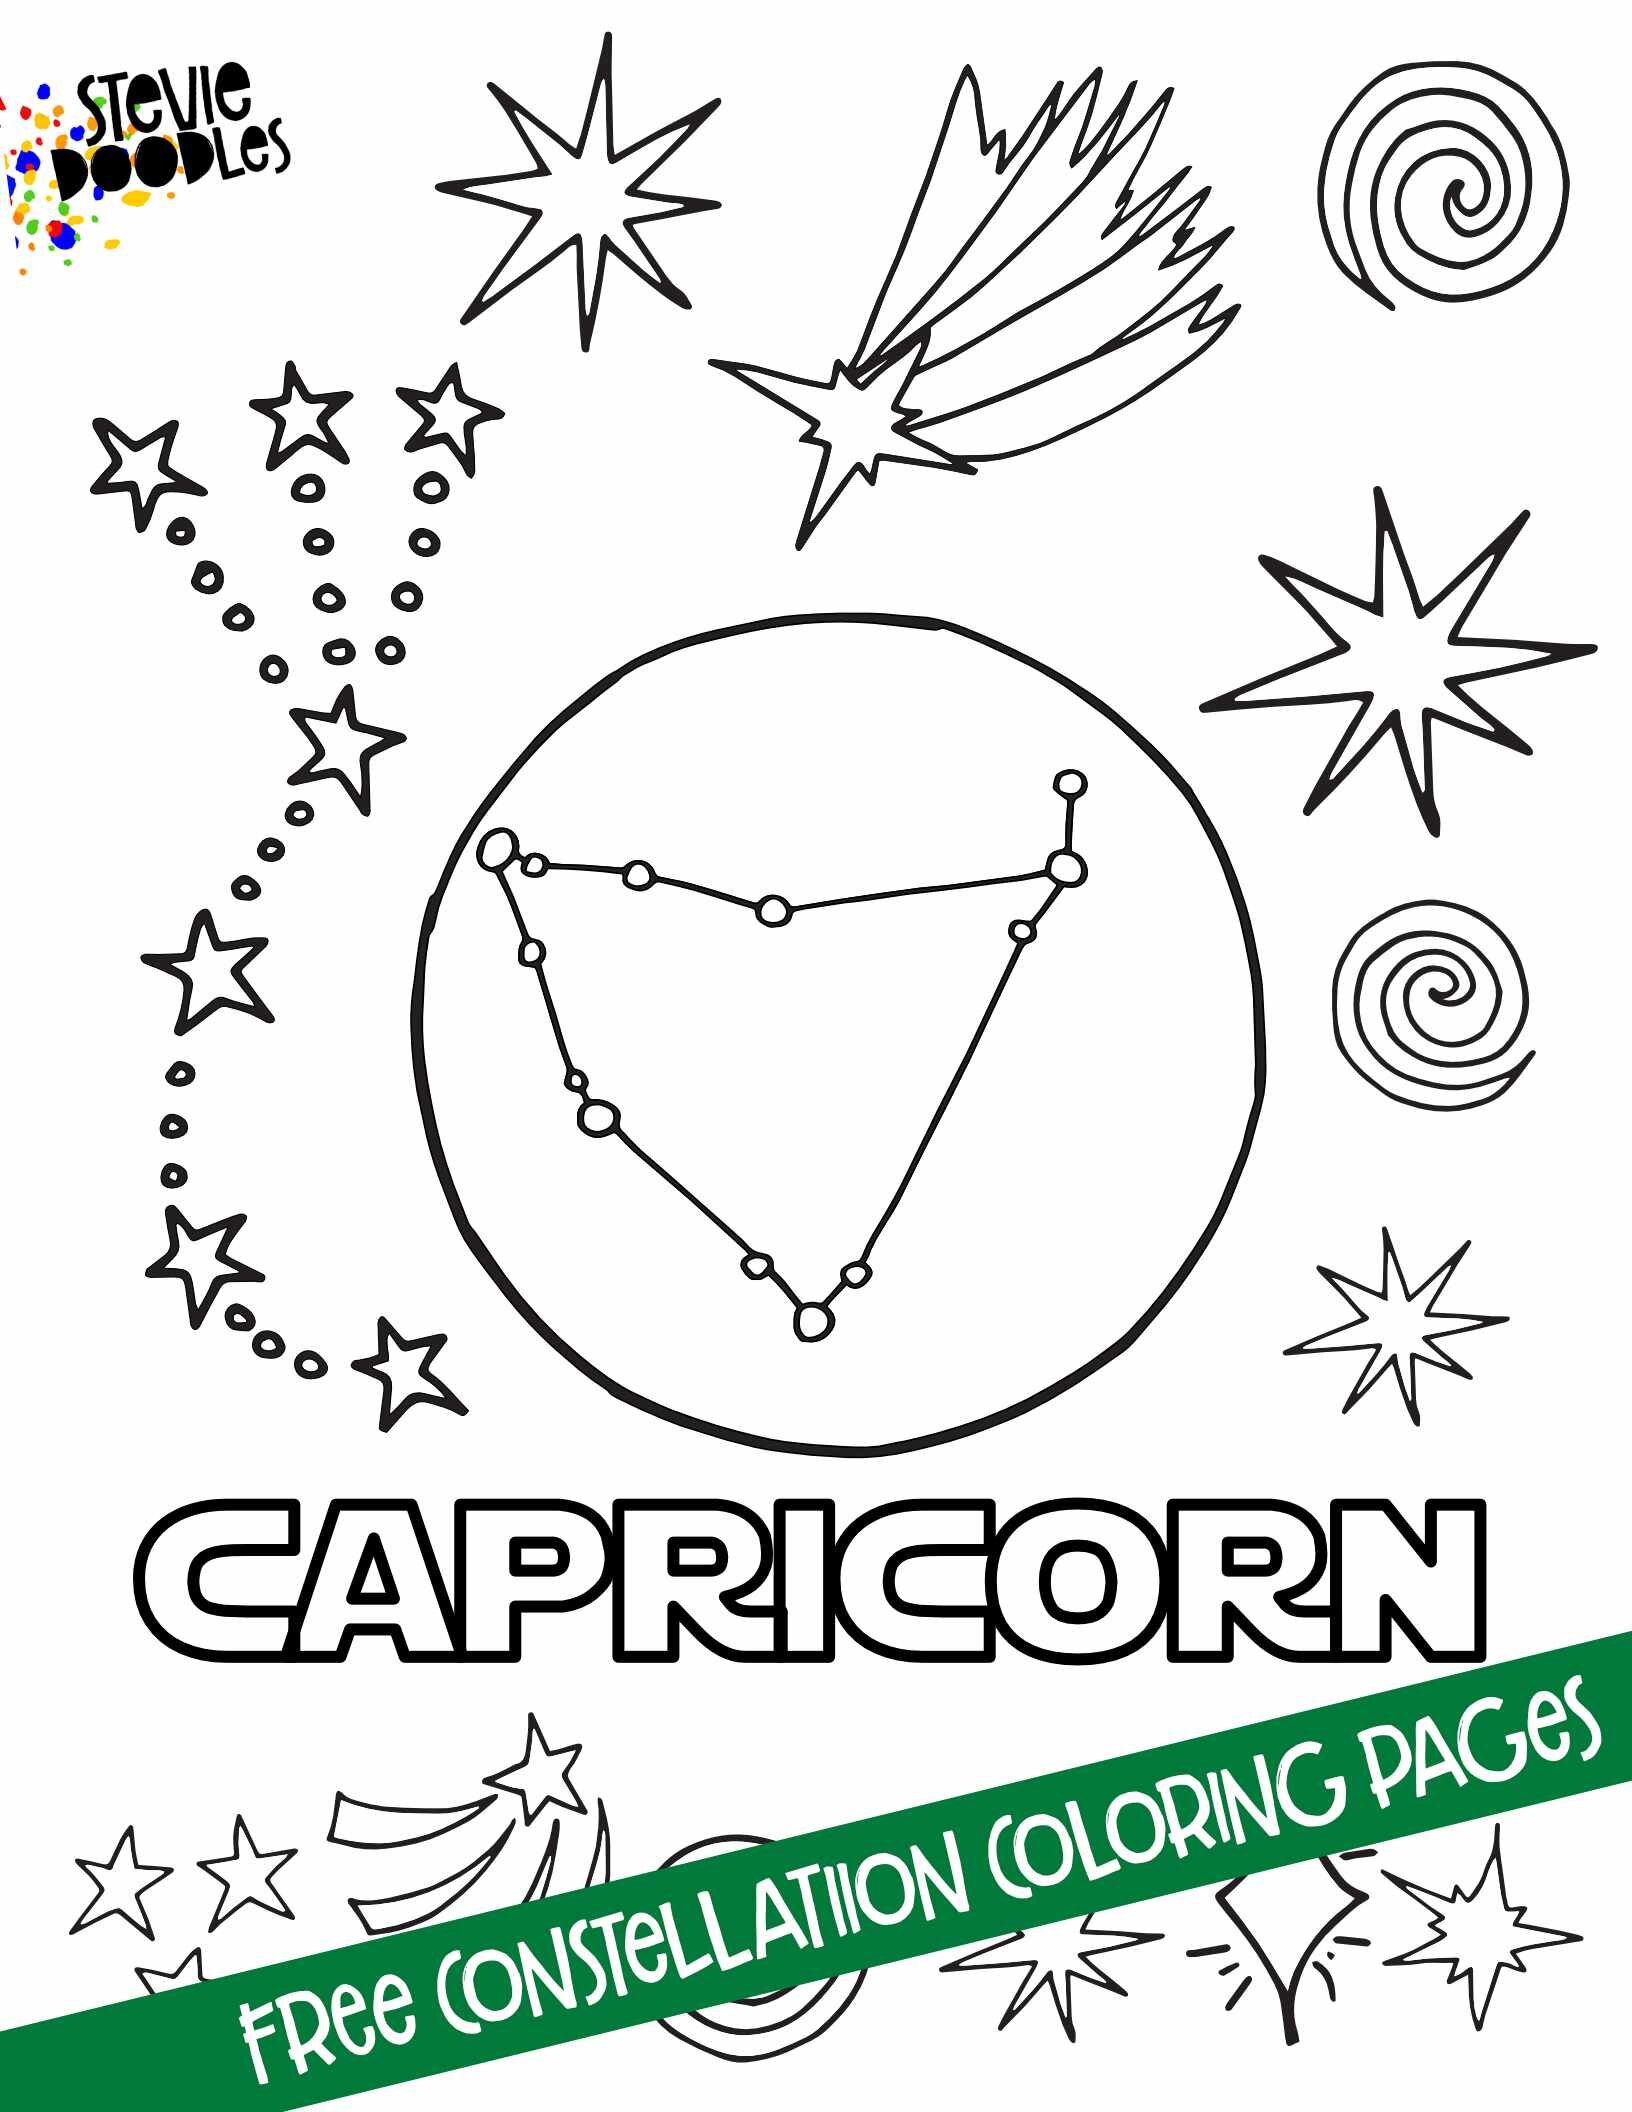 CAPRICORN - 12 Free Constellation Coloring Pages - Over 1000 Free Coloring Pages CLICK HERE TO PRINT THE PAGE ABOVE